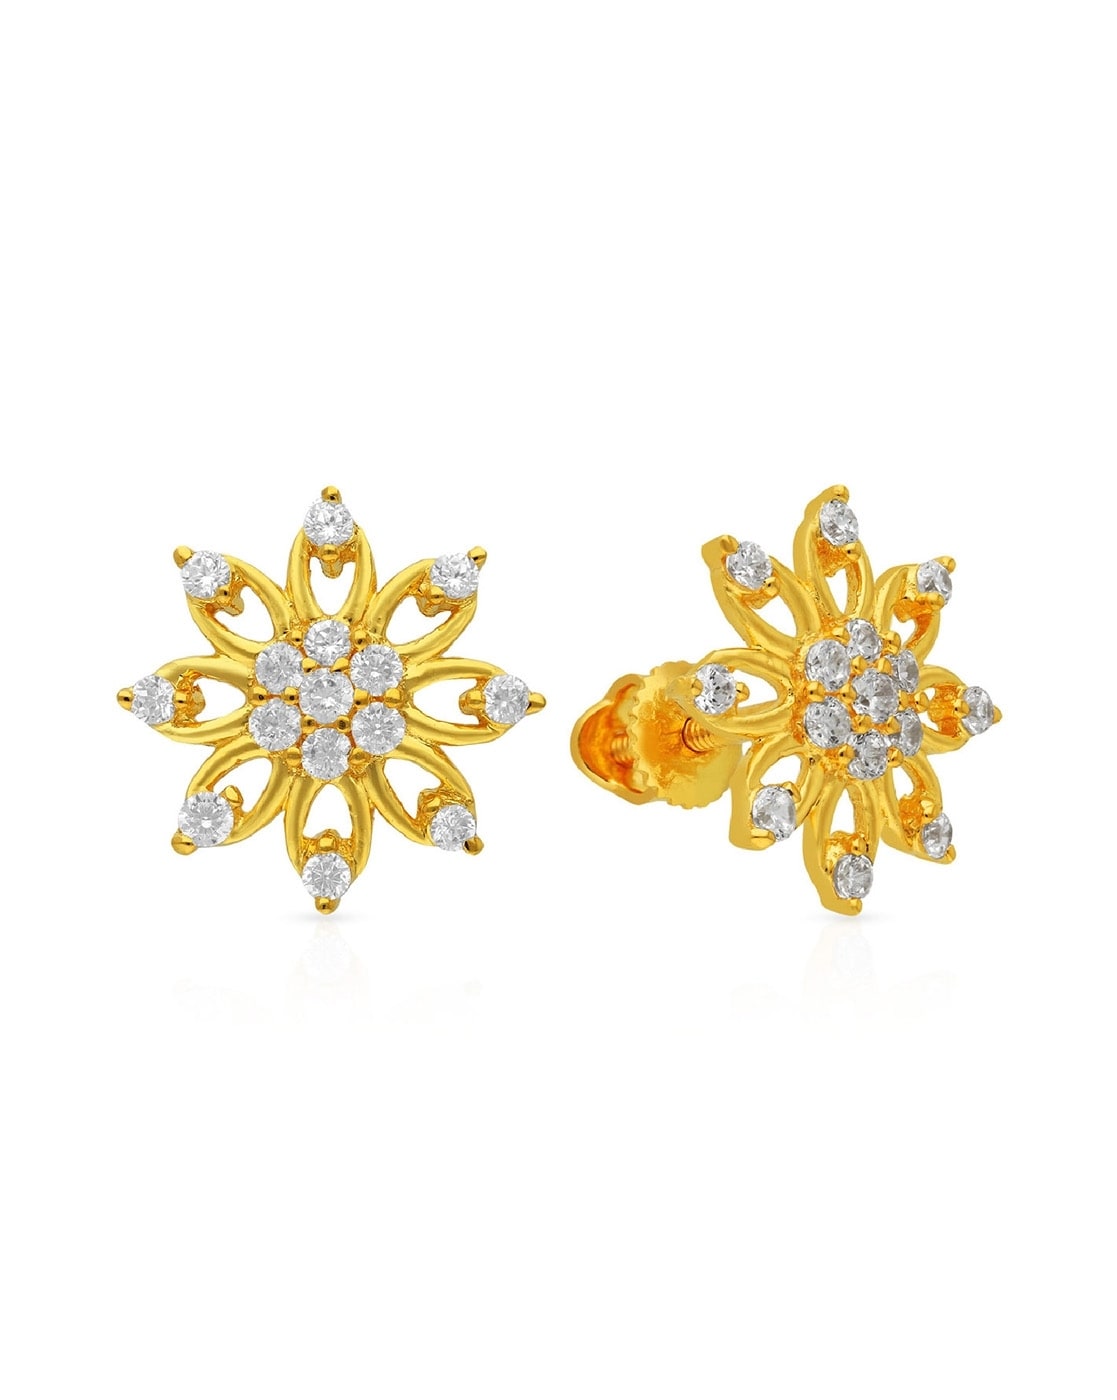 Malabar Gold And Diamonds 22kt Yellow Gold Stud Earrings For Women in Delhi  - Dealers, Manufacturers & Suppliers -Justdial